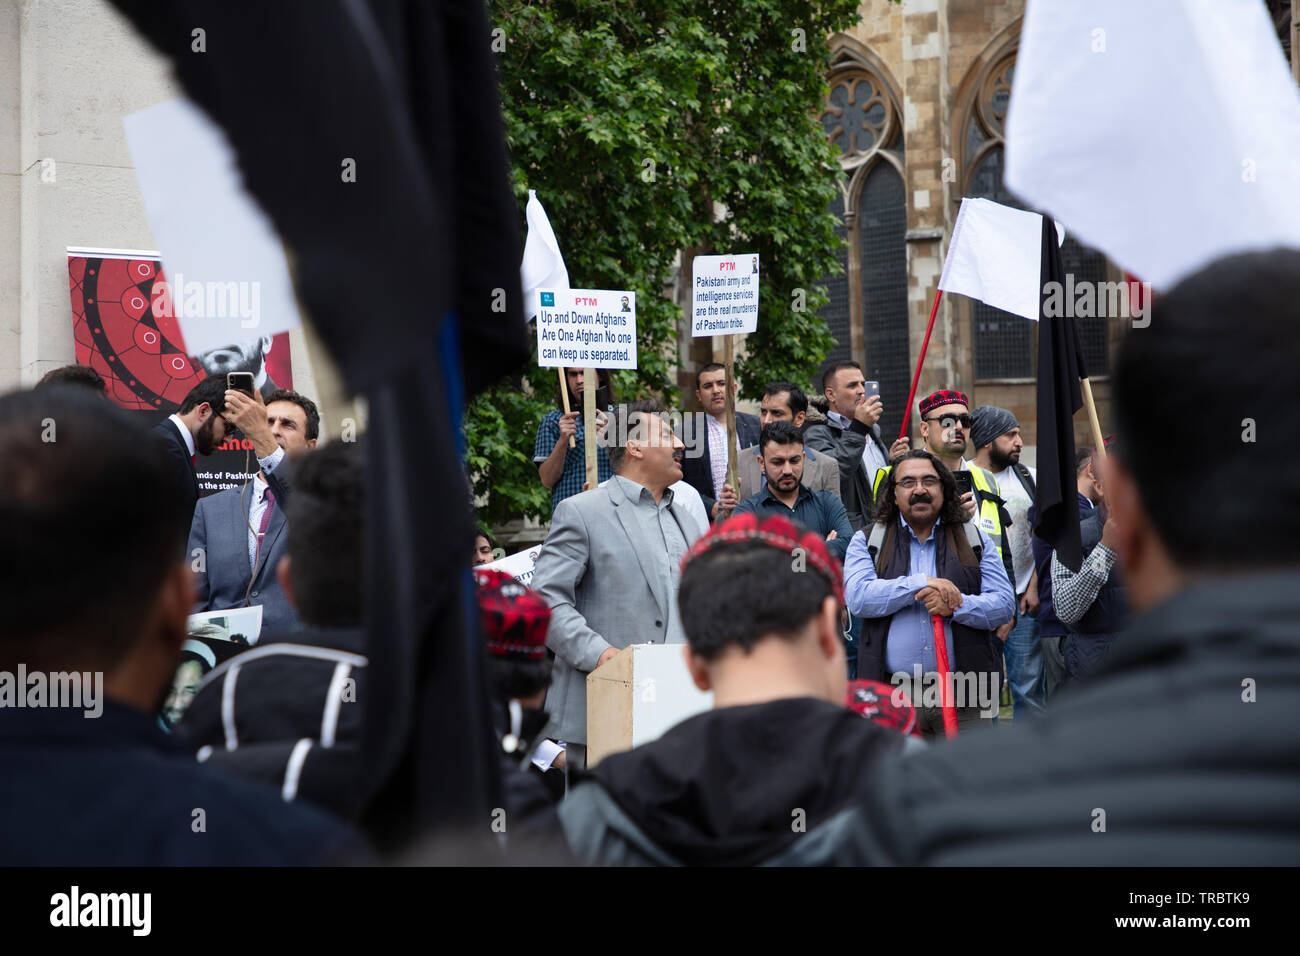 London, UK. 30th May 2019. Pashtuns protest opposite the House of Parliament in London against alleged persecution and atrocities by fundamentalist groups, the Pakistani army and Pakistani Intelligence Service committing brutal killings, the demolishing of properties, disappearances and extra-judicial killings of Pashtuns and members of other tribes in Pakistan. Credit: Joe Kuis / Alamy Stock Photo